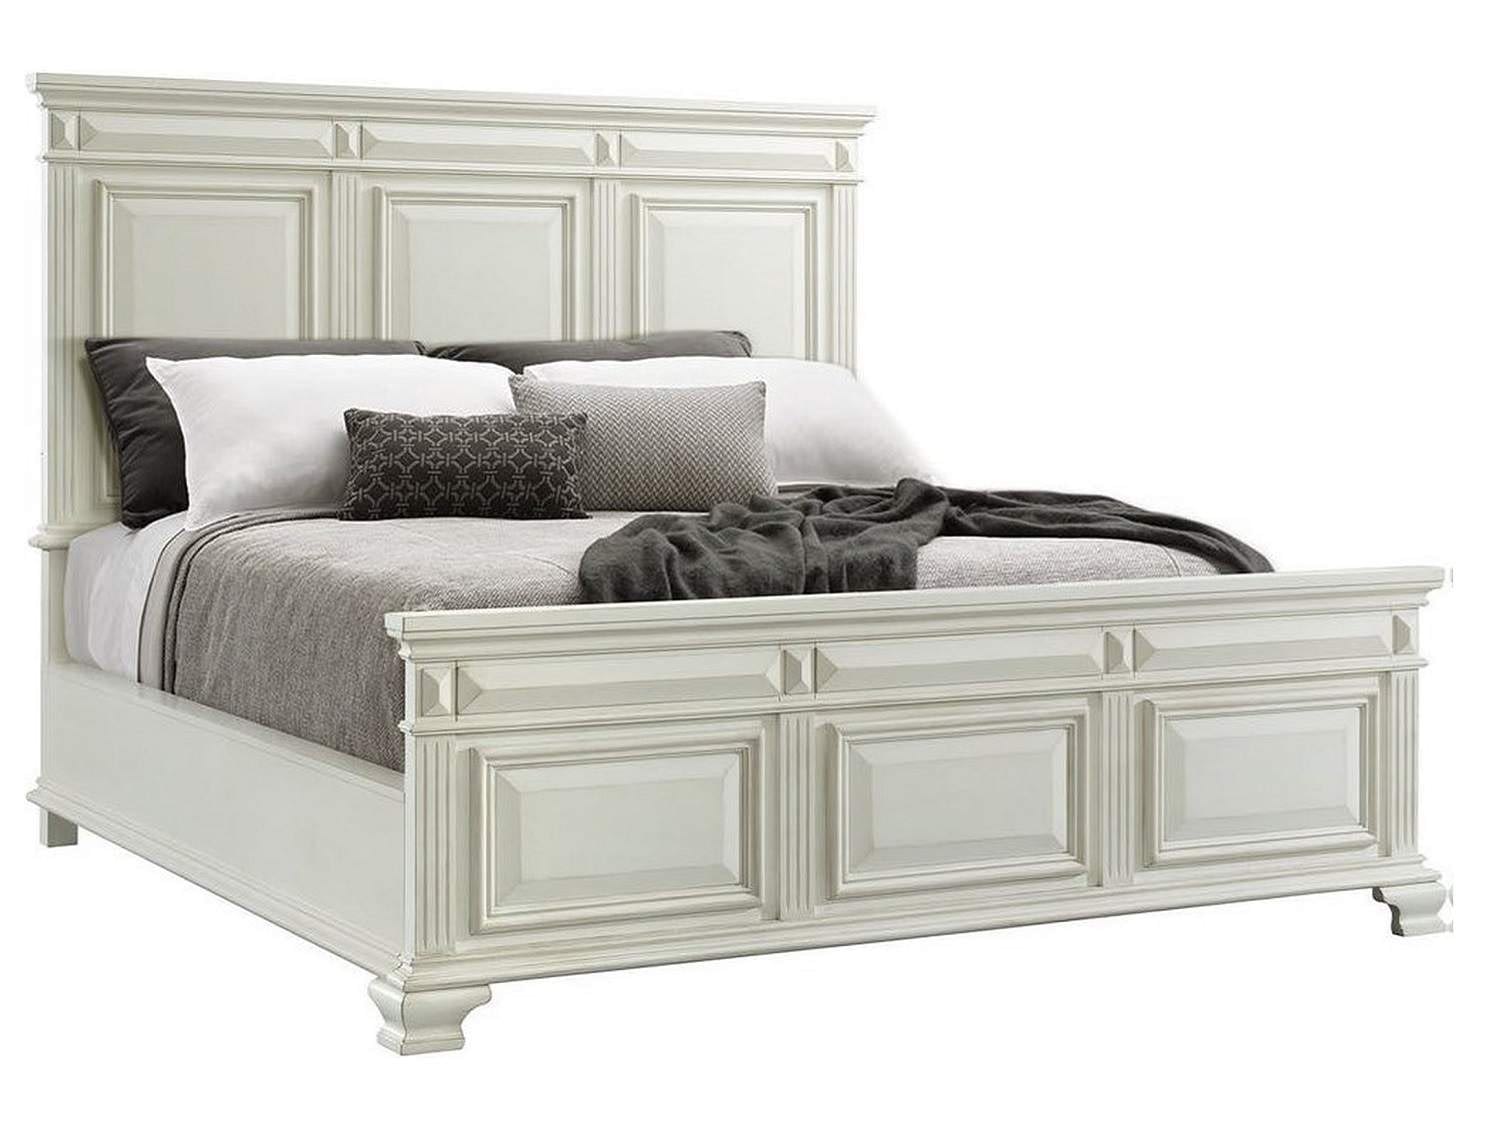 BOYDS King Bed